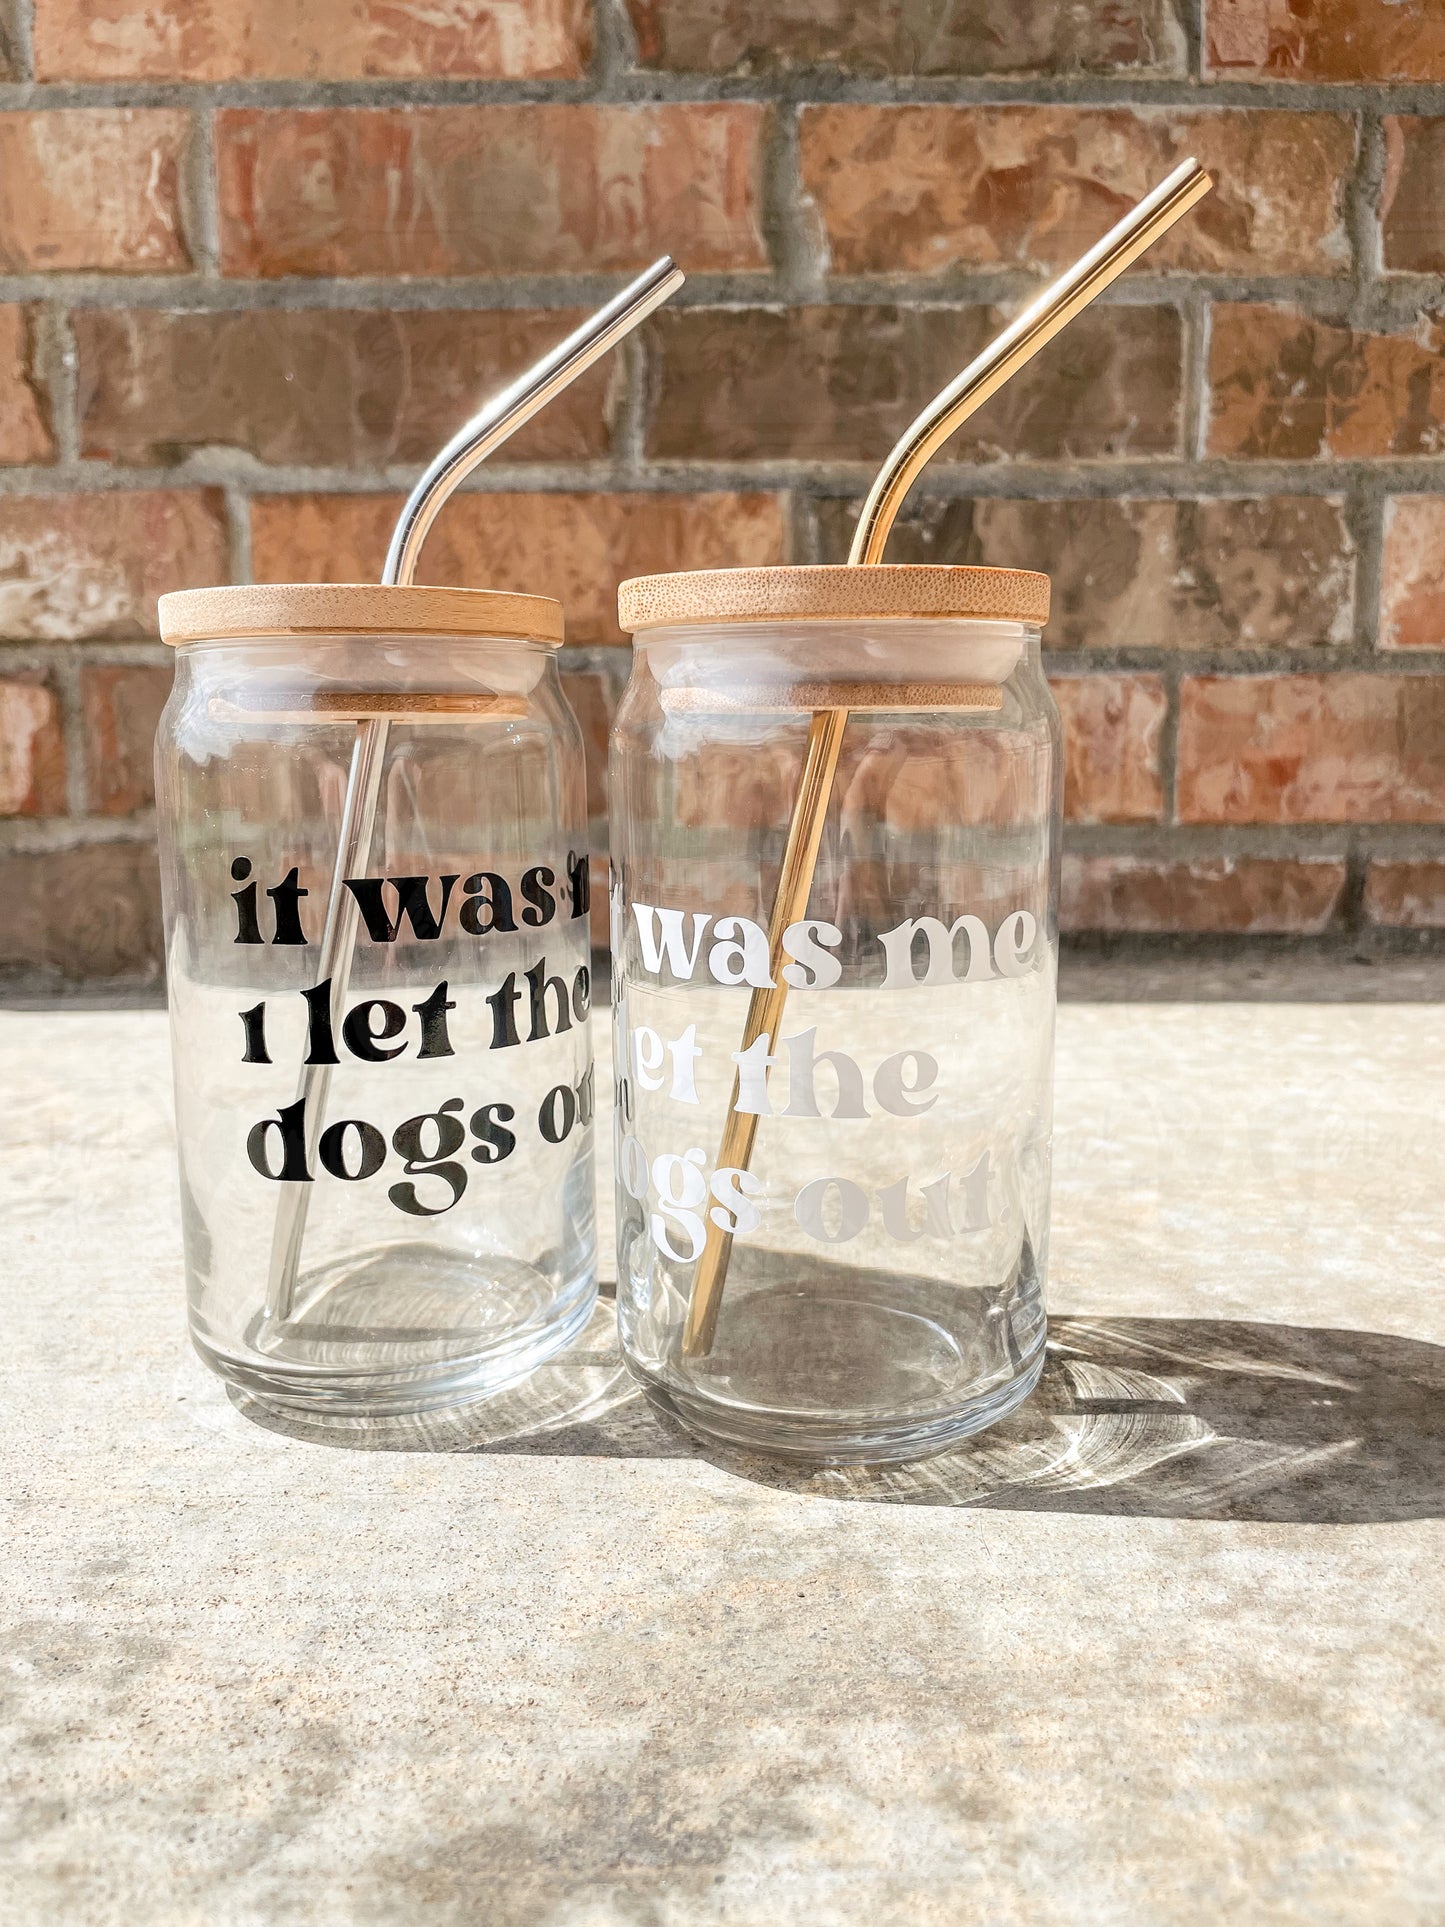 I Let the Dogs Out Cup